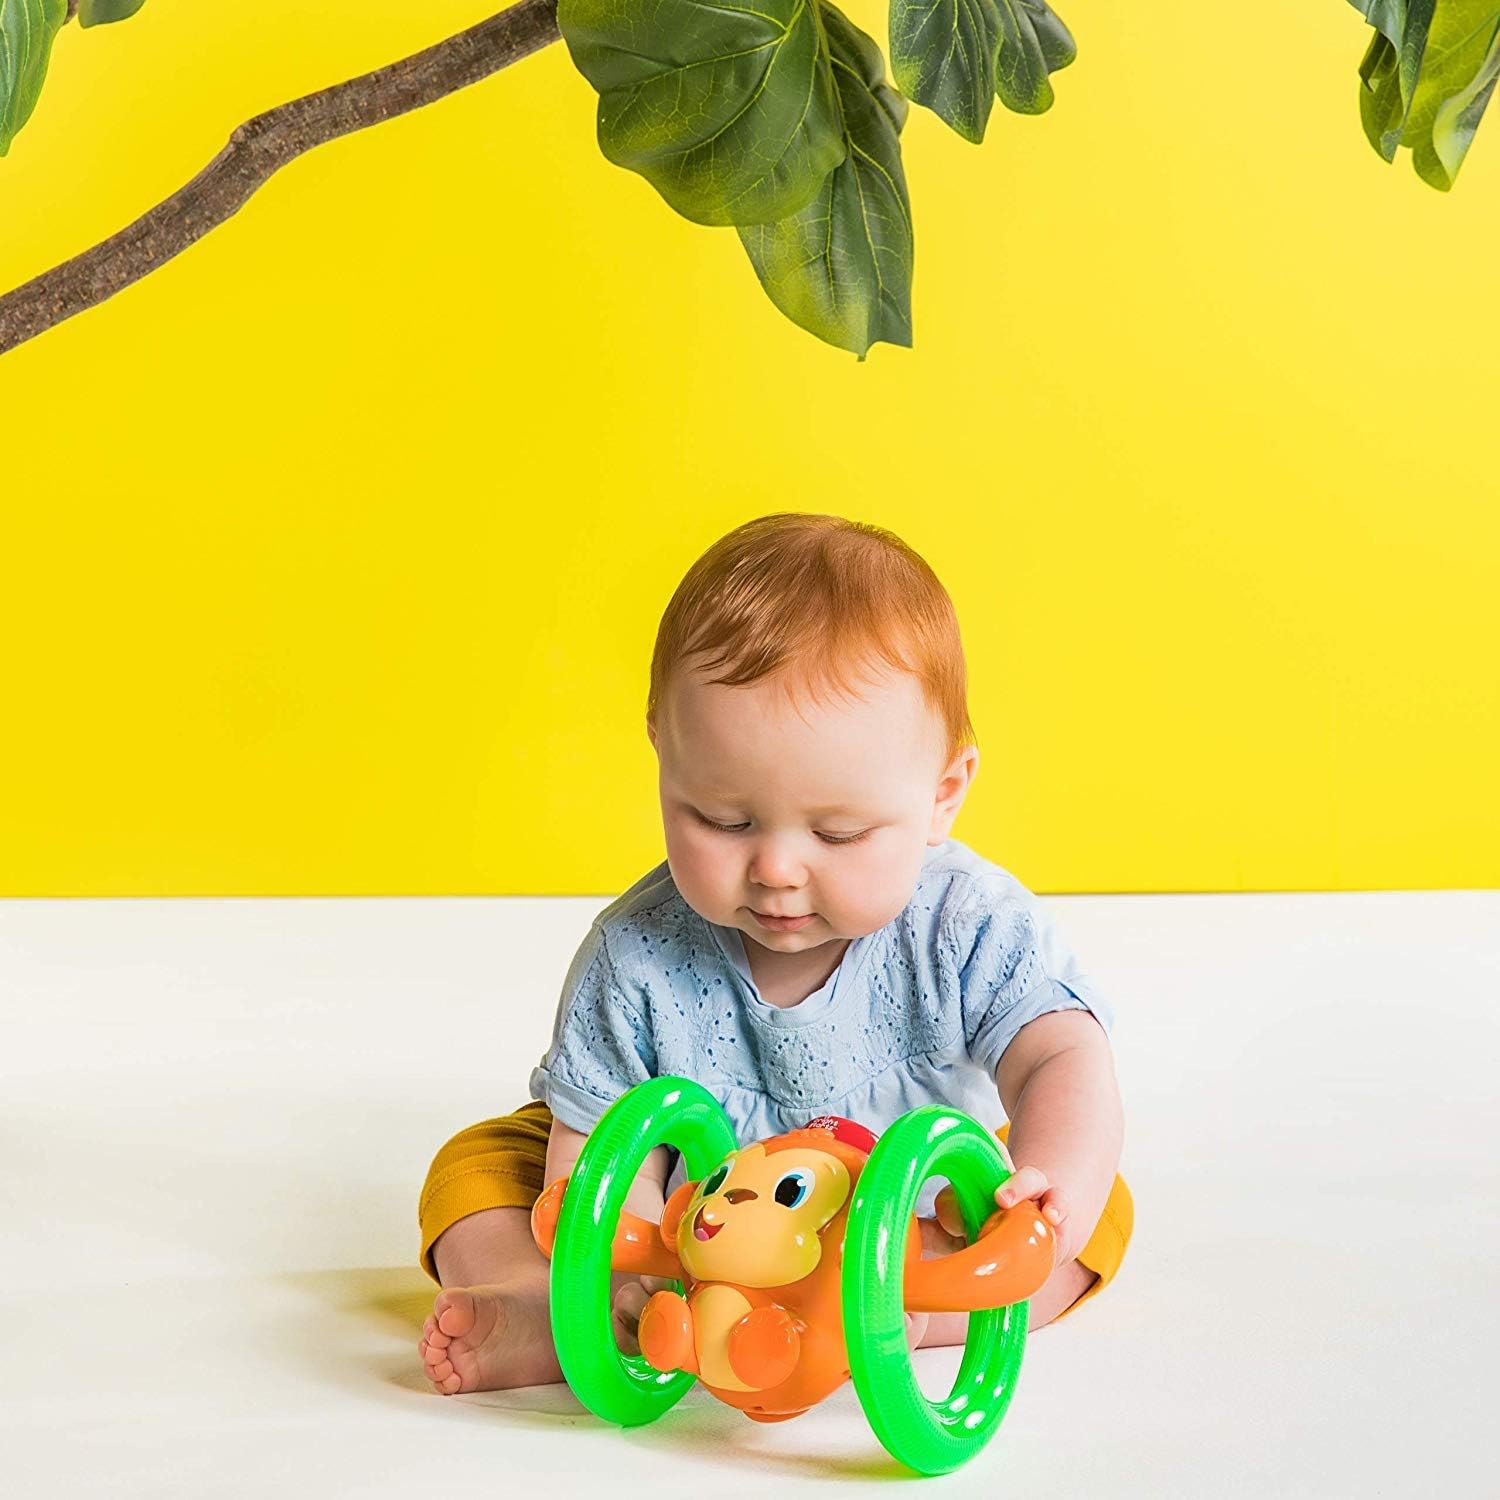 Bright Starts Roll & Glow Monkey Crawling Baby Toy with Lights and Sounds